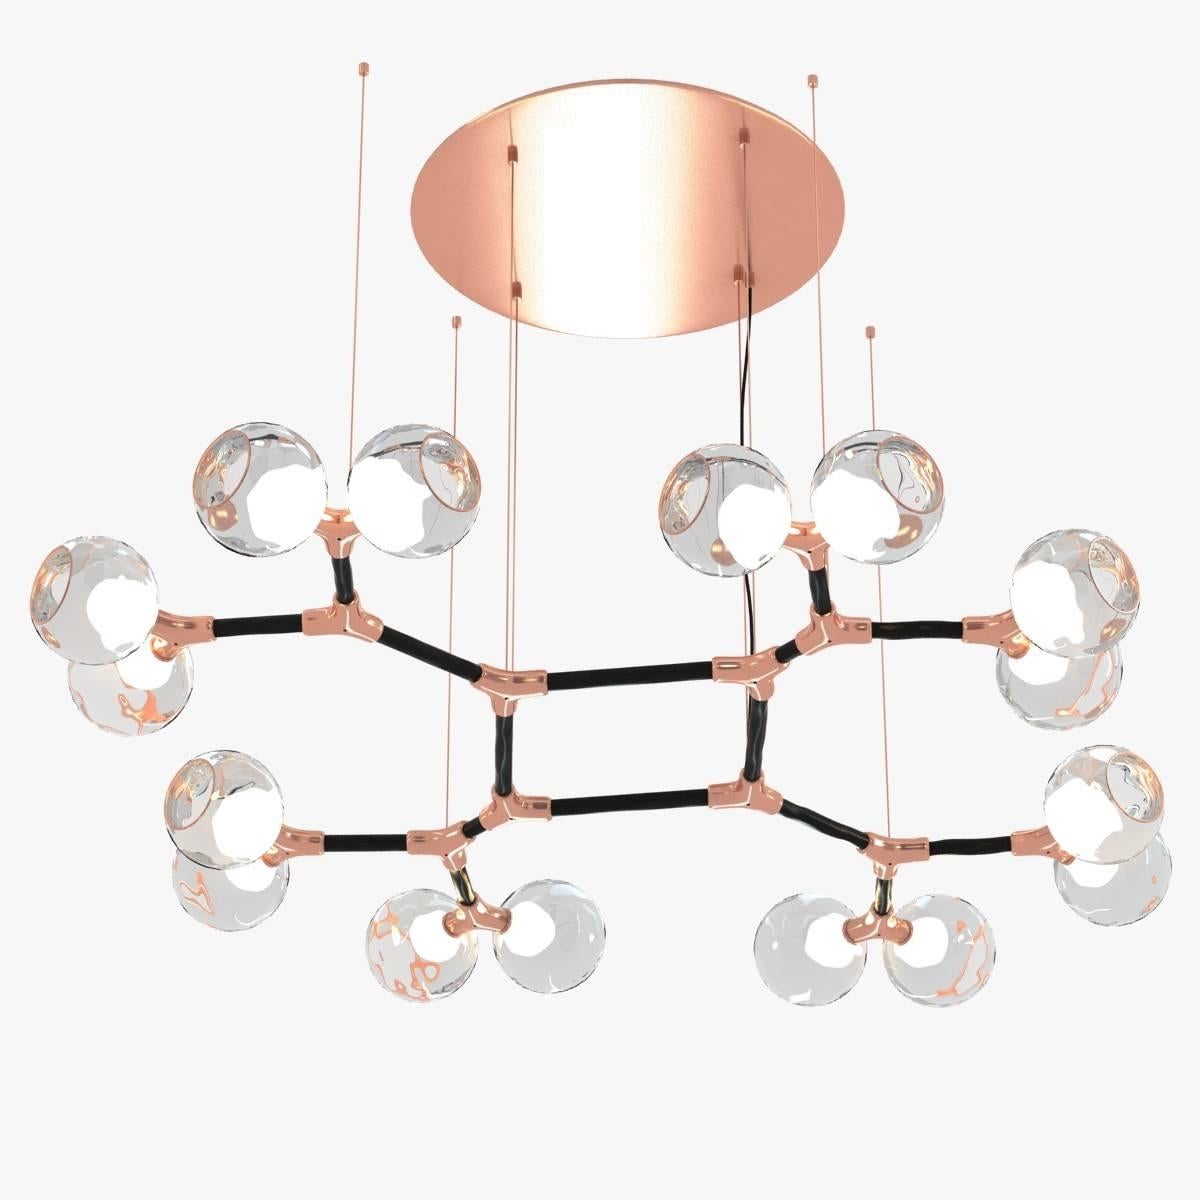 Huge European Modern Brass and Lacquered Horus Chandelier by Brabbu For Sale 3